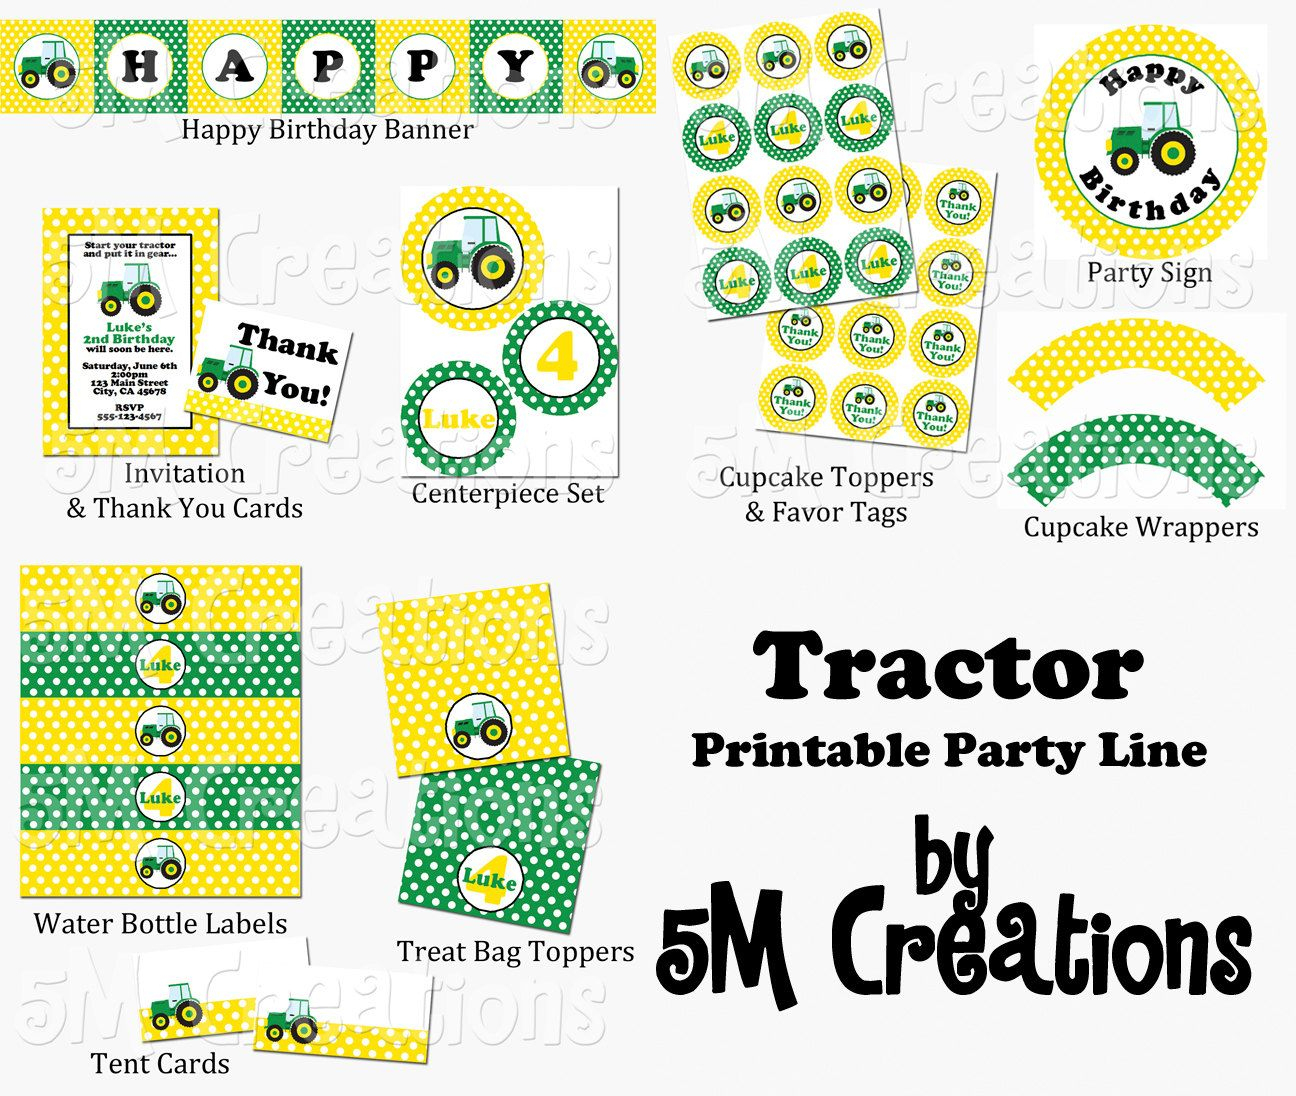 John Deere Party Packages | Tractor Party Package - John Deere - Free Printable John Deere Food Labels